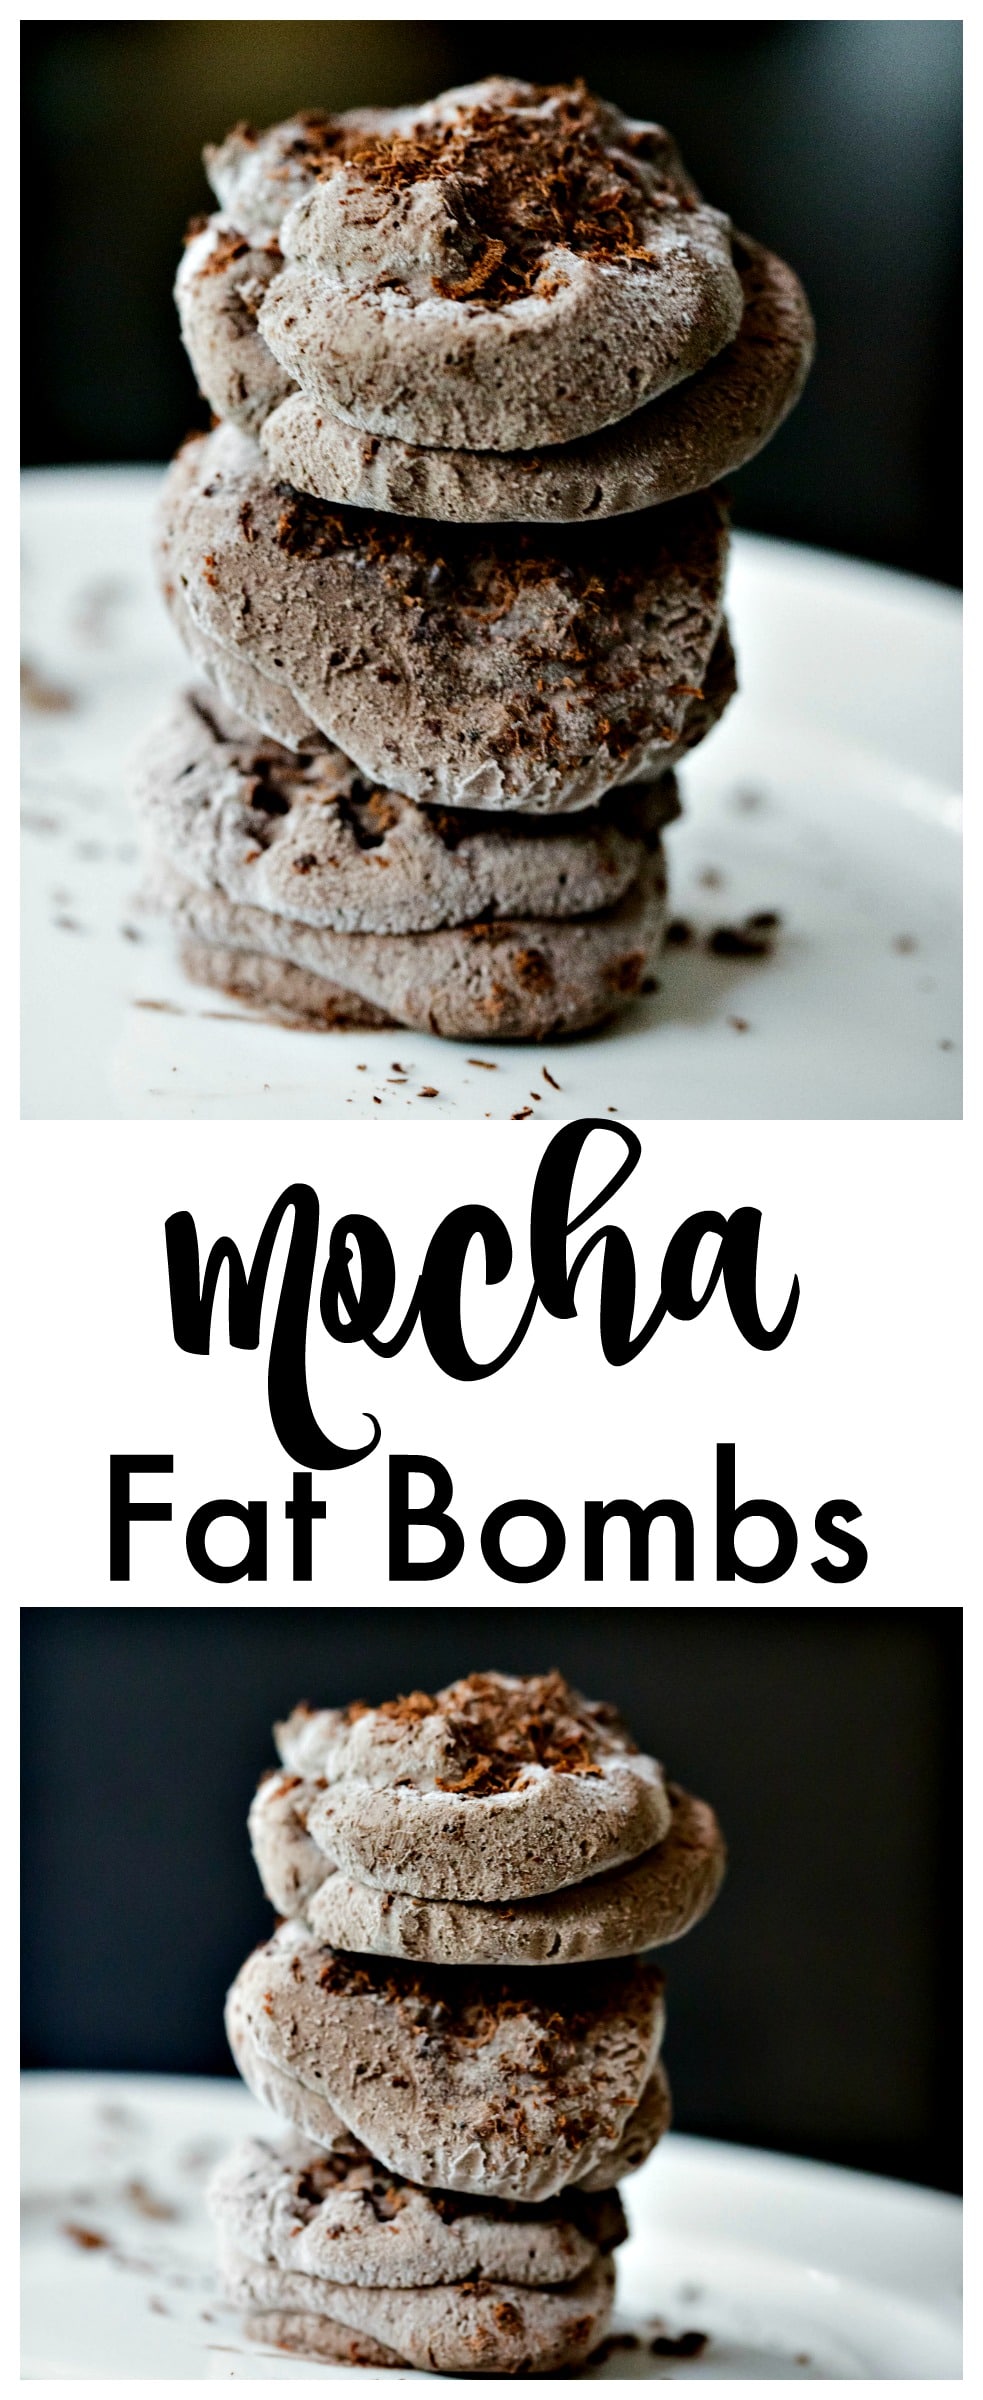 Mouthwatering Mocha Chocolate Fat Bombs - Keto/Low Carb Friendly